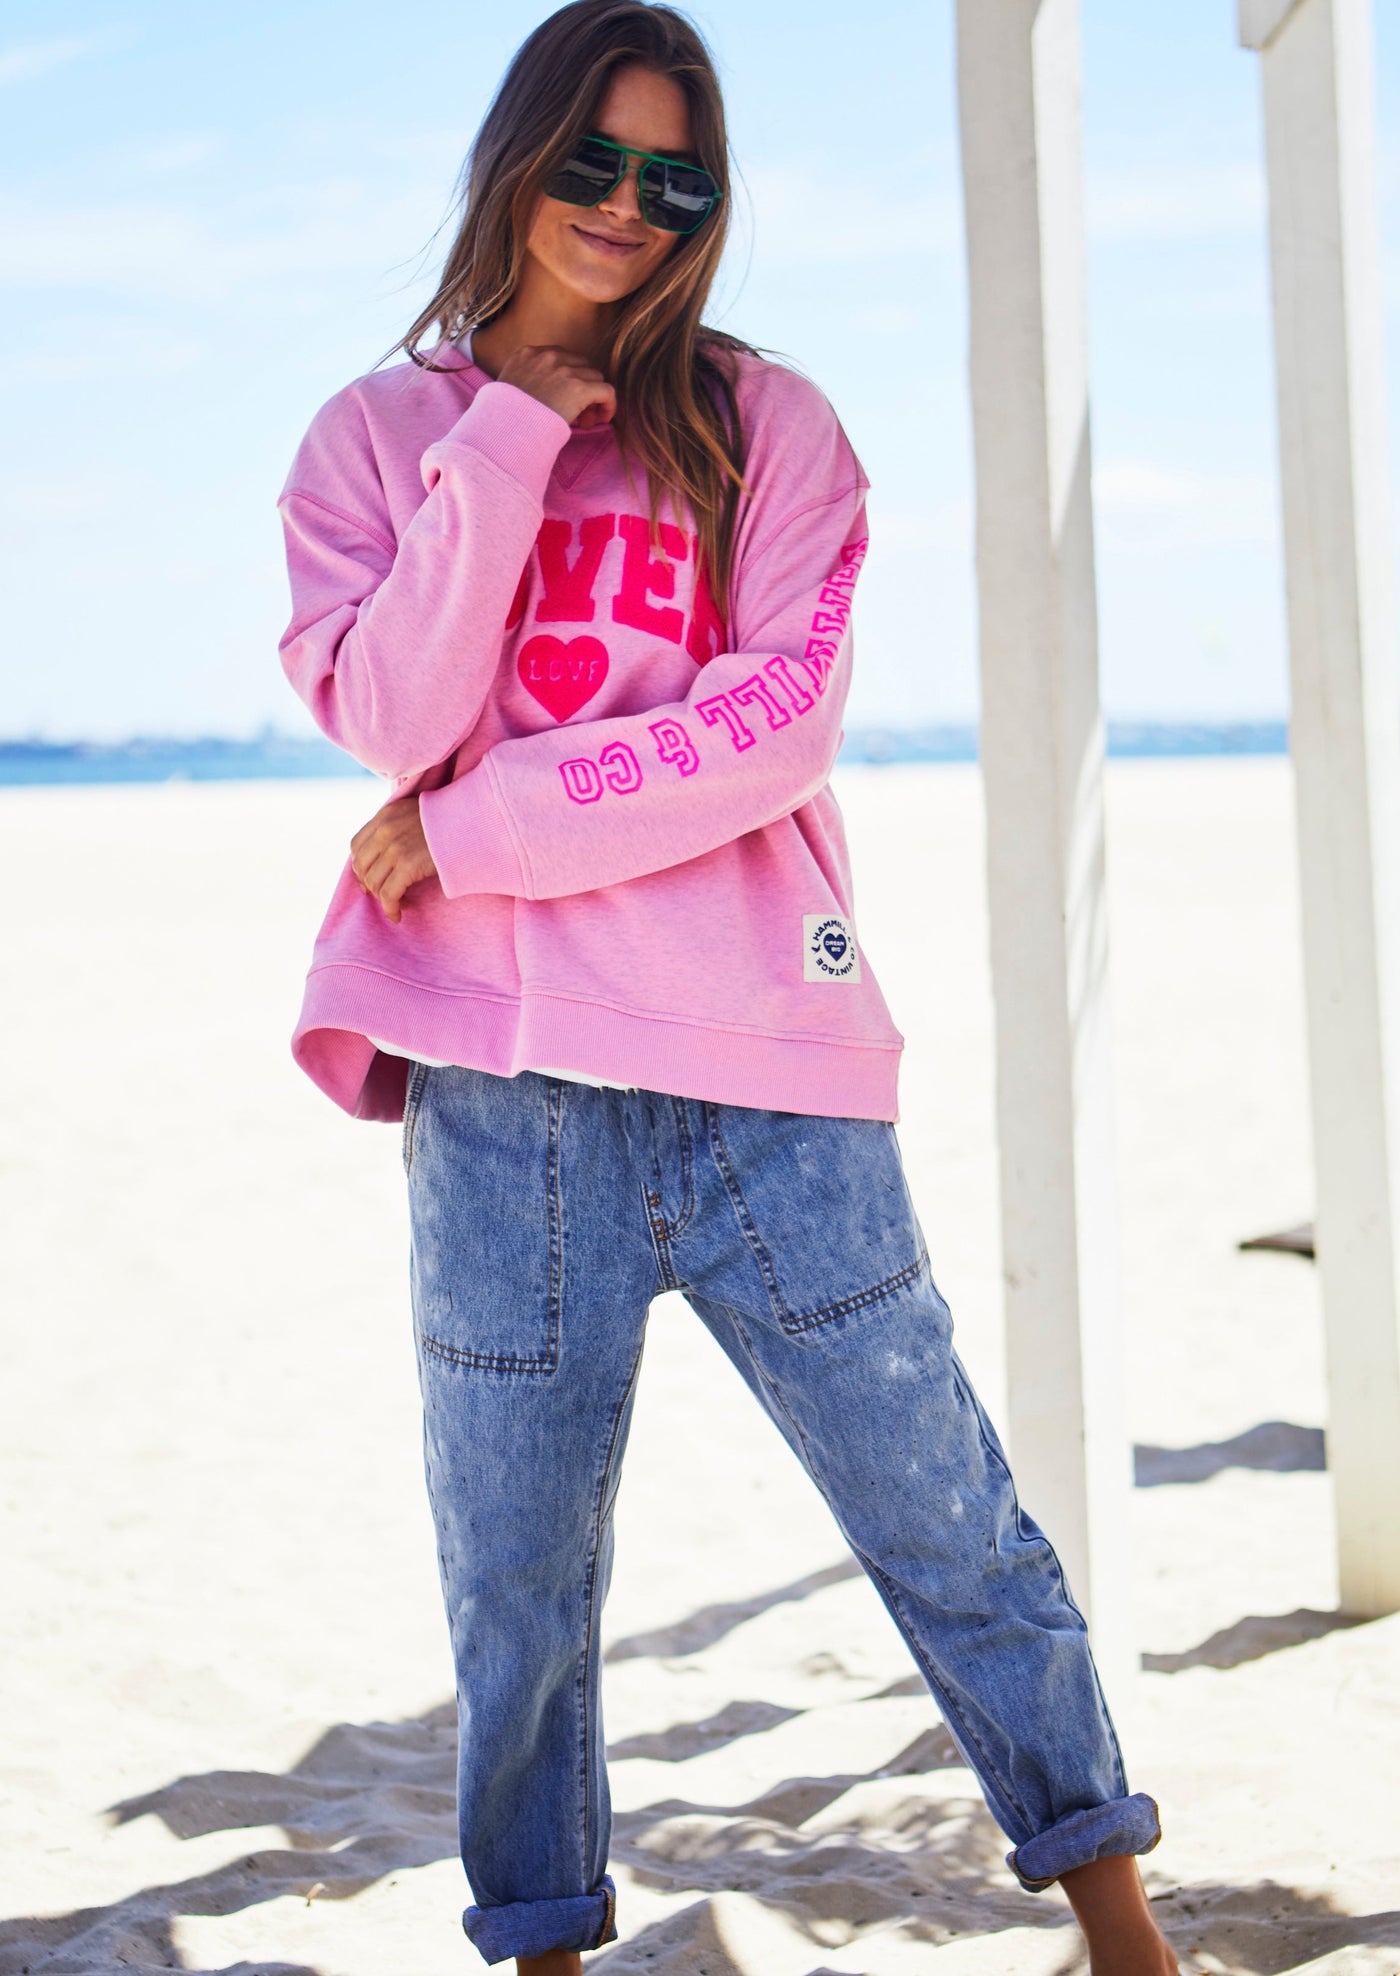 LOVER PINK MARLE SWEAT